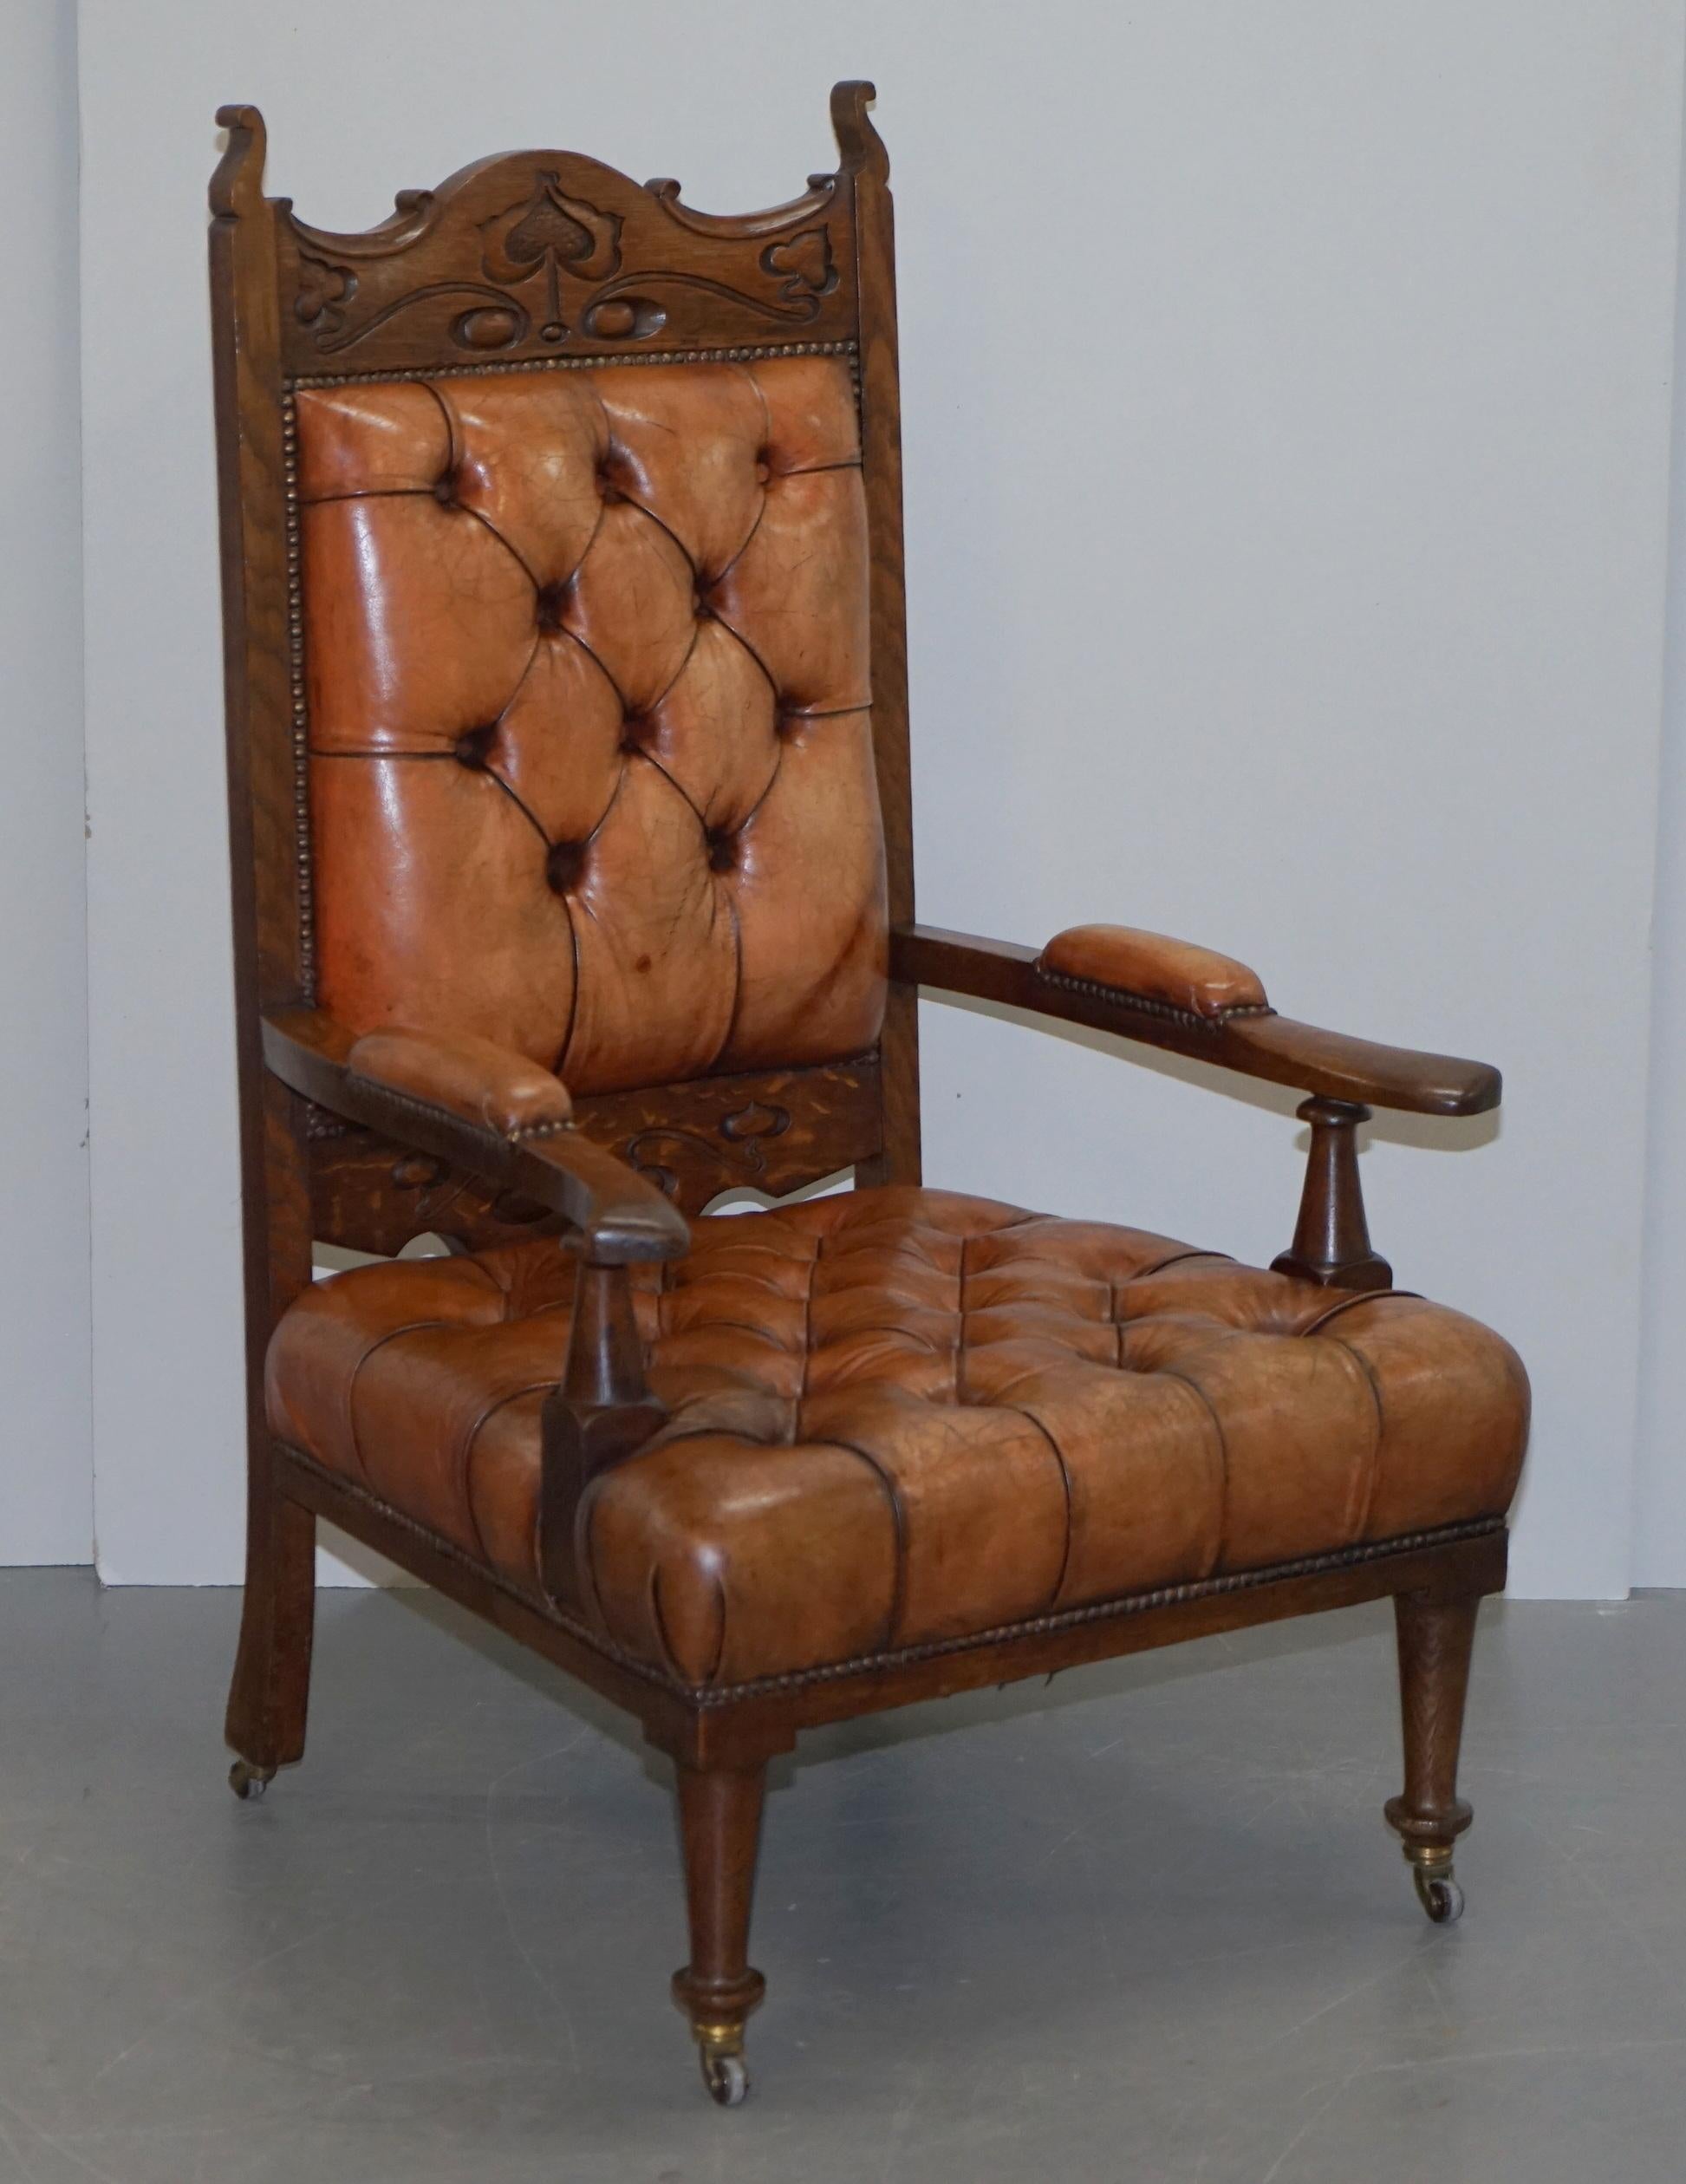 We are delighted to offer for sale this exceptionally rare pair of Victorian Chesterfield library armchairs with Liberty’s of London style Art Nouveau carved frames

What a pair of chairs!!! I have never seen another like them with the Liberty’s